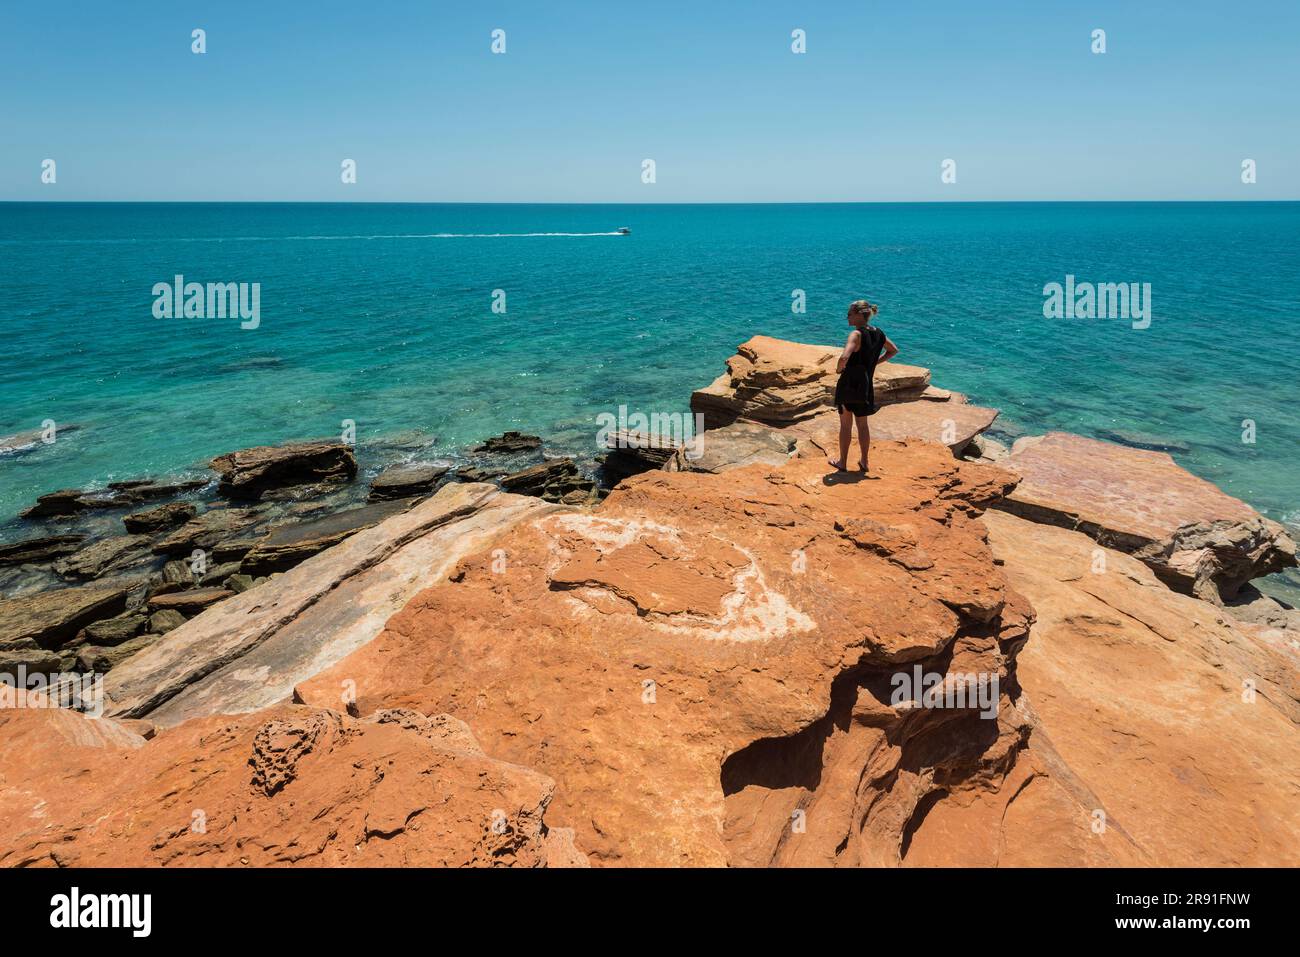 A woman stands at the edge of the rocks at Gantheaume point as a small boat passes by in Broome Western Australia Stock Photo